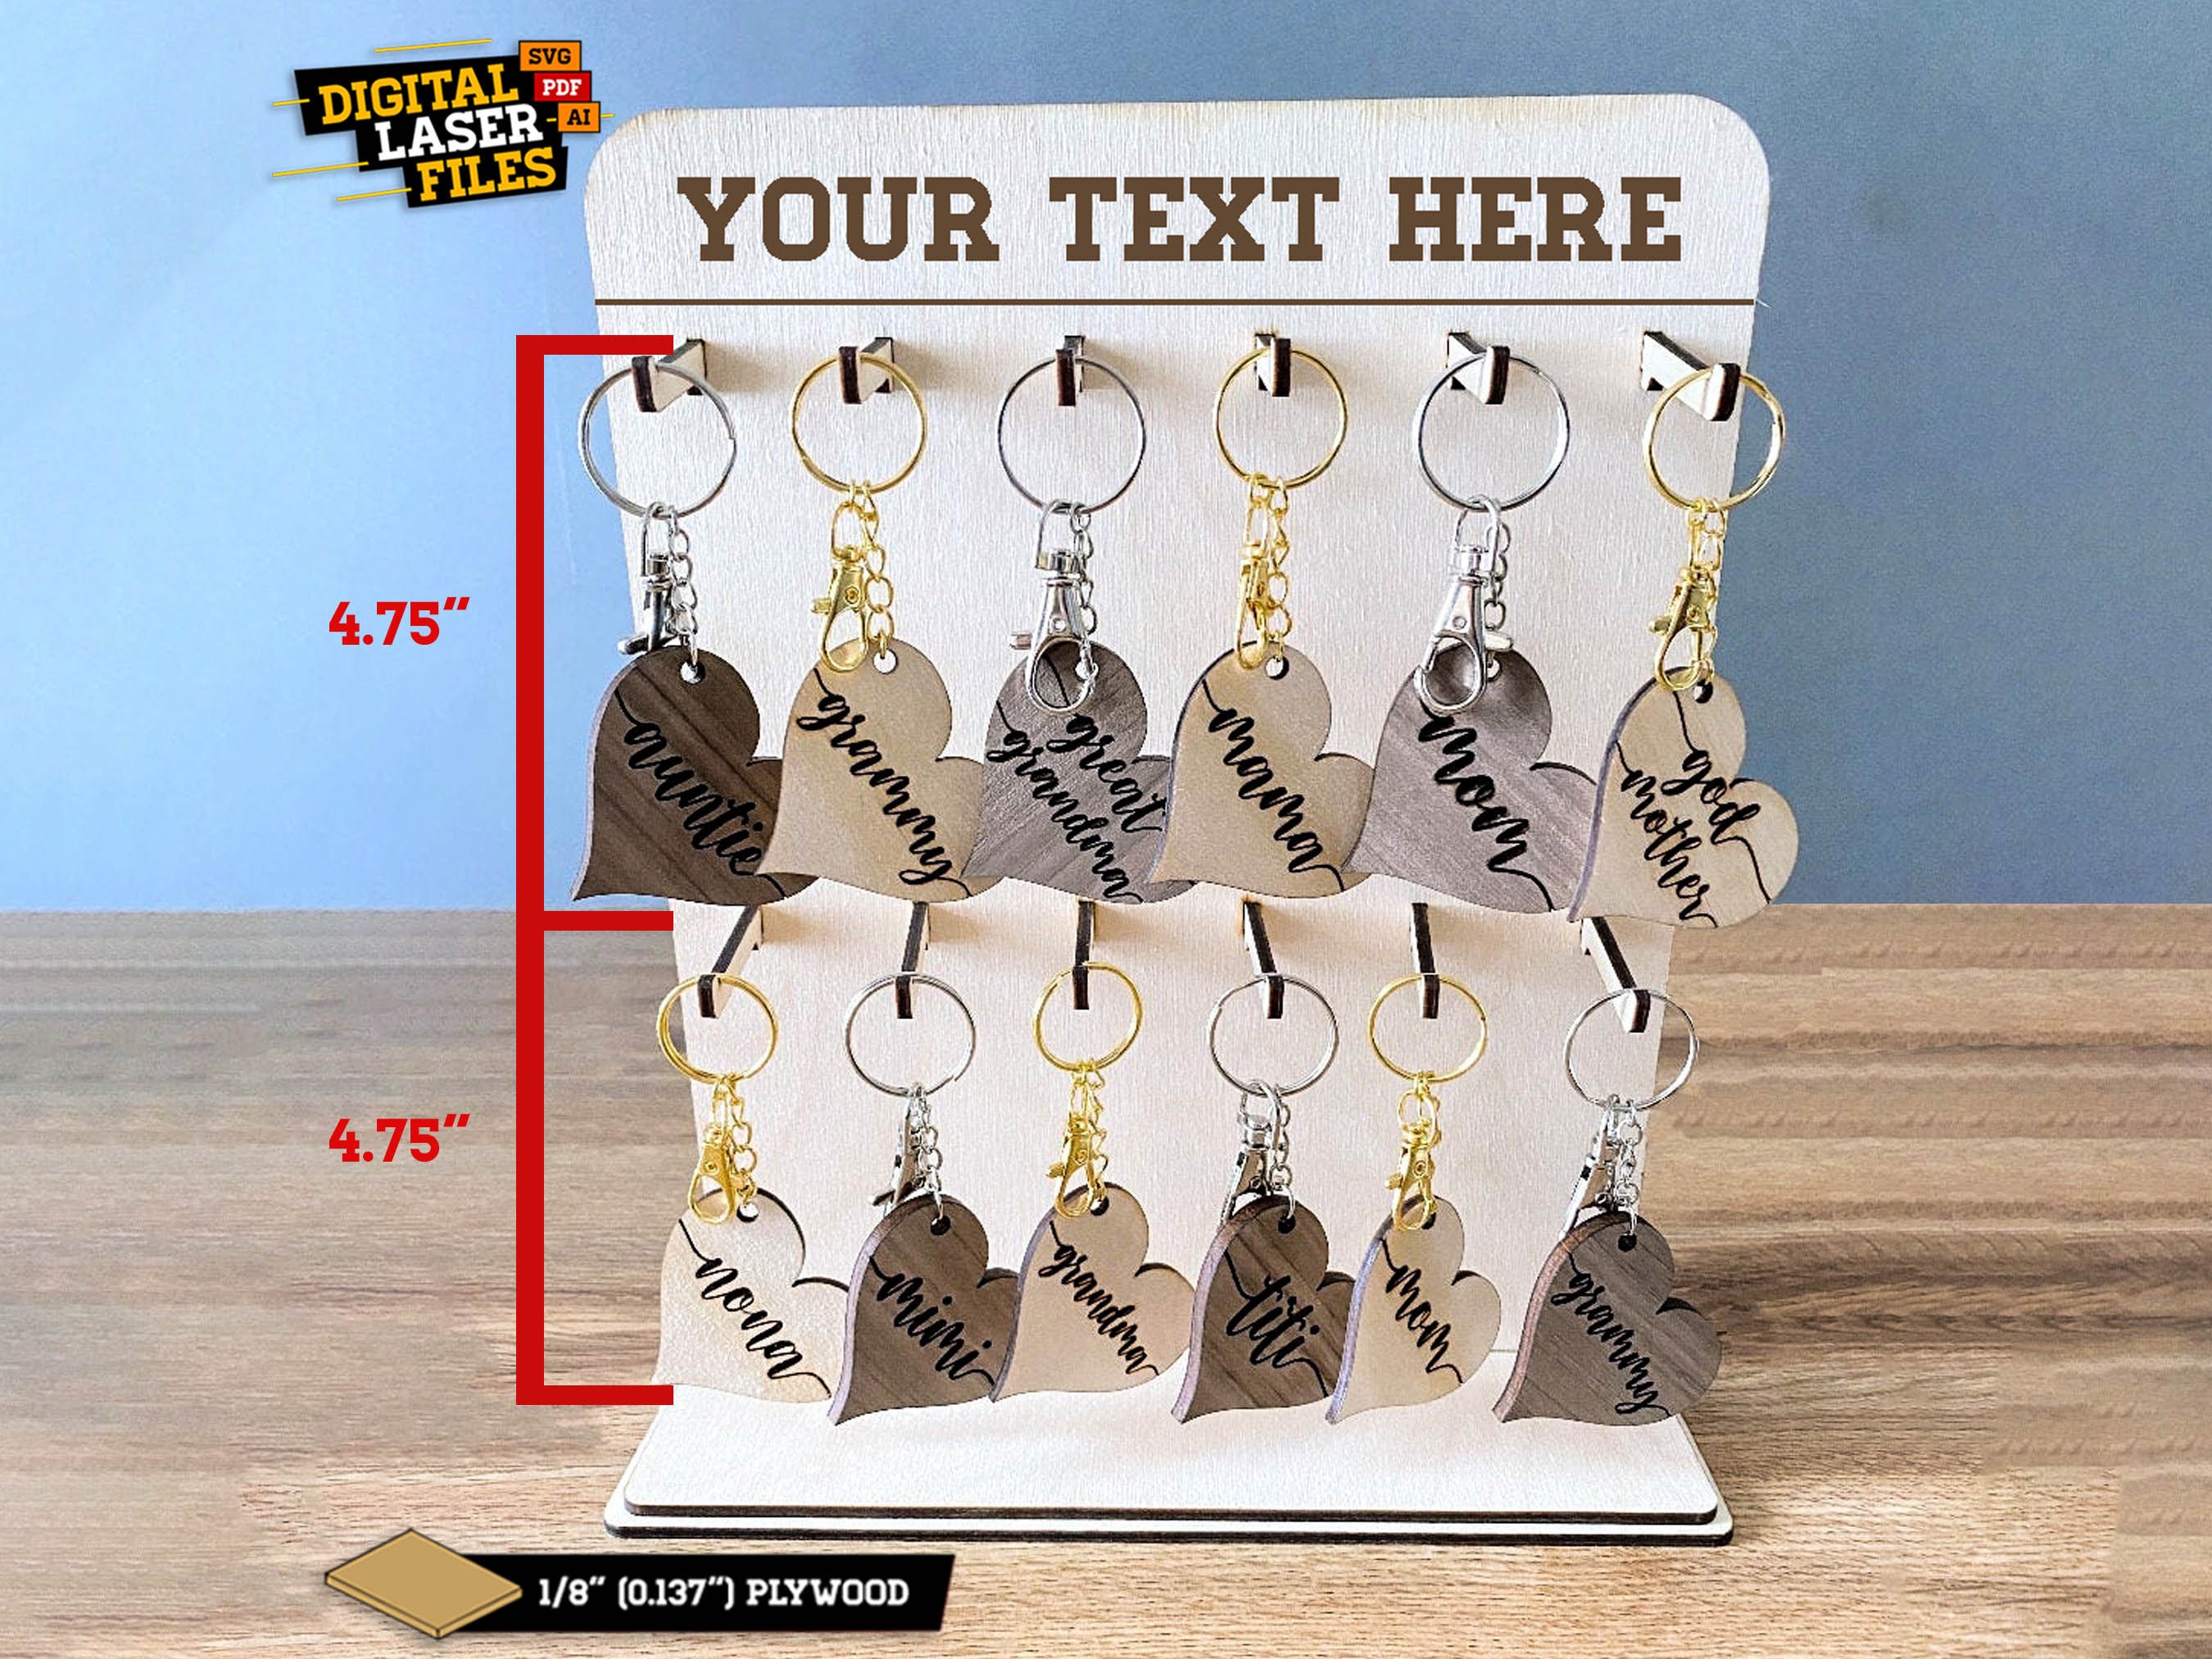 Display Stand for Wristlet Keychains Double Sided With Wood Pendant Basket  SVG File Glowforge Laser Cutter 